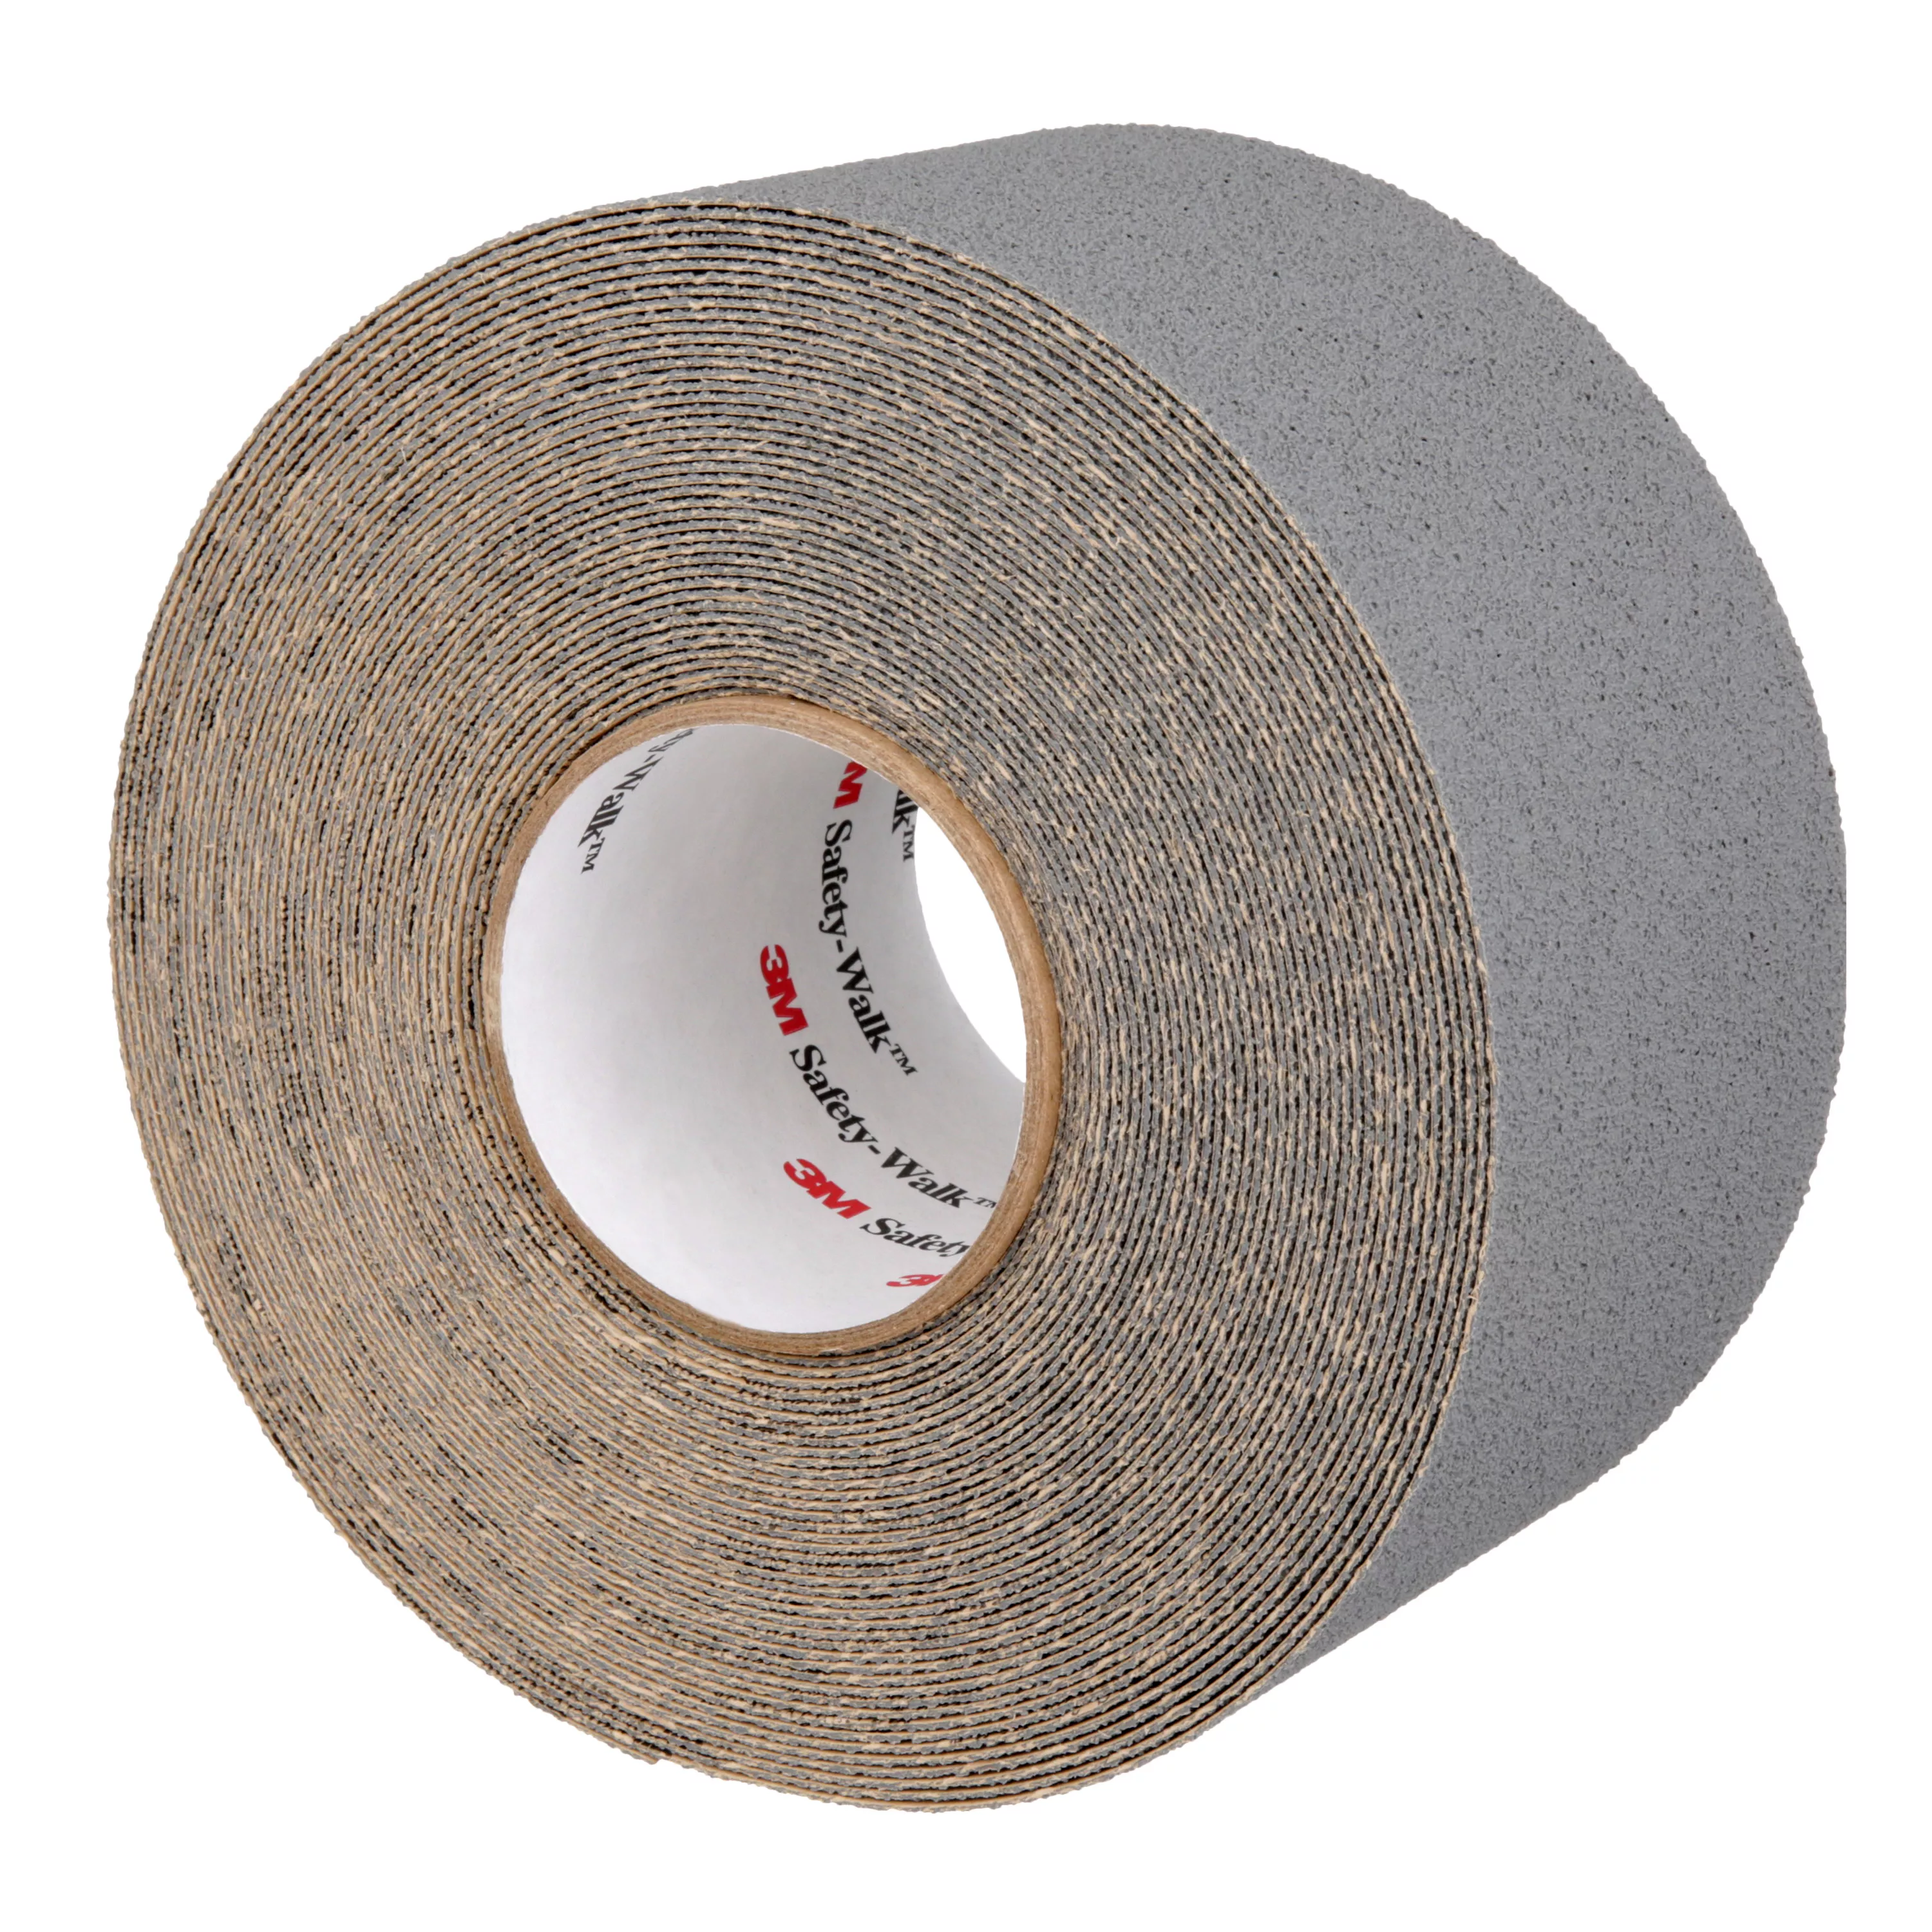 Product Number 370 | 3M™ Safety-Walk™ Slip-Resistant Medium Resilient Tapes & Treads 370